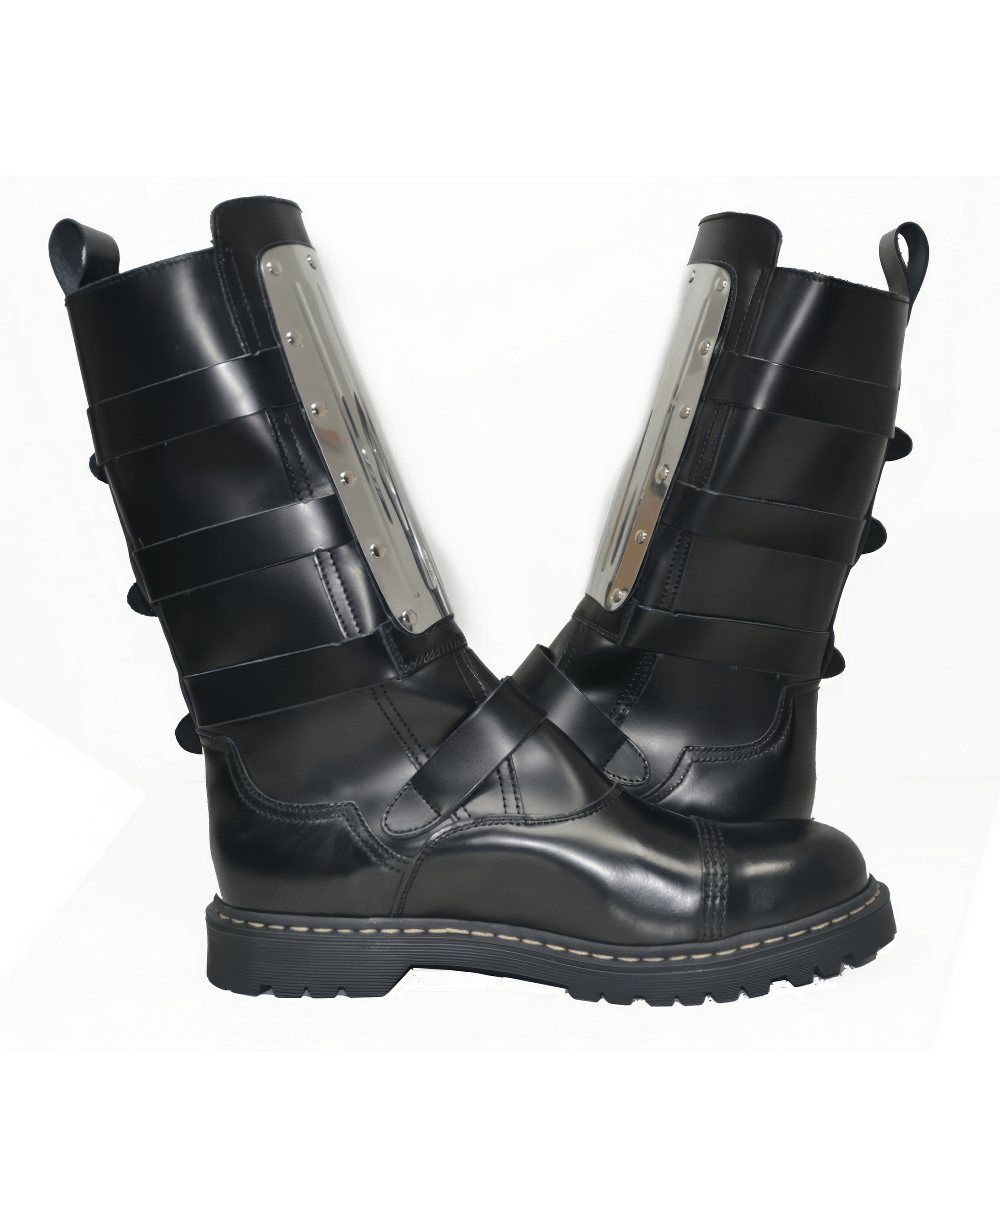 Unisex Black Leather Boots with Flat Sole in Biker Style